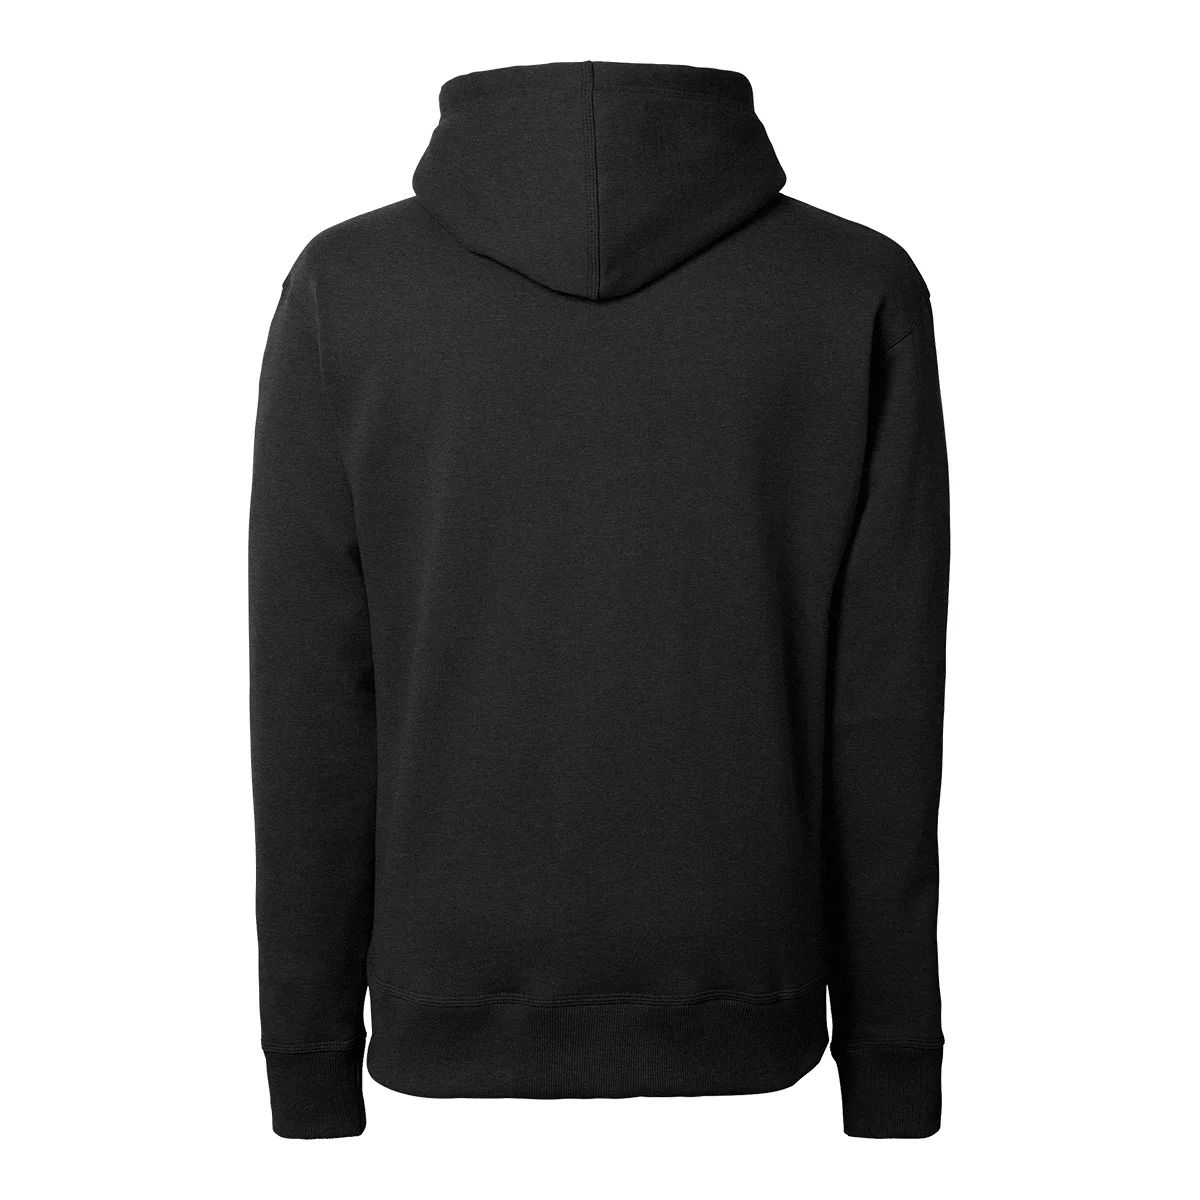 https://media-www.atmosphere.ca/product/div-03-softgoods/dpt-70-athletic-clothing/sdpt-01-mens/332758243/champion-graphic-powerblend-f-black-s--e8a2cf7f-f033-40d9-920b-e19346b6c270-jpgrendition.jpg?imdensity=1&imwidth=1244&impolicy=mZoom